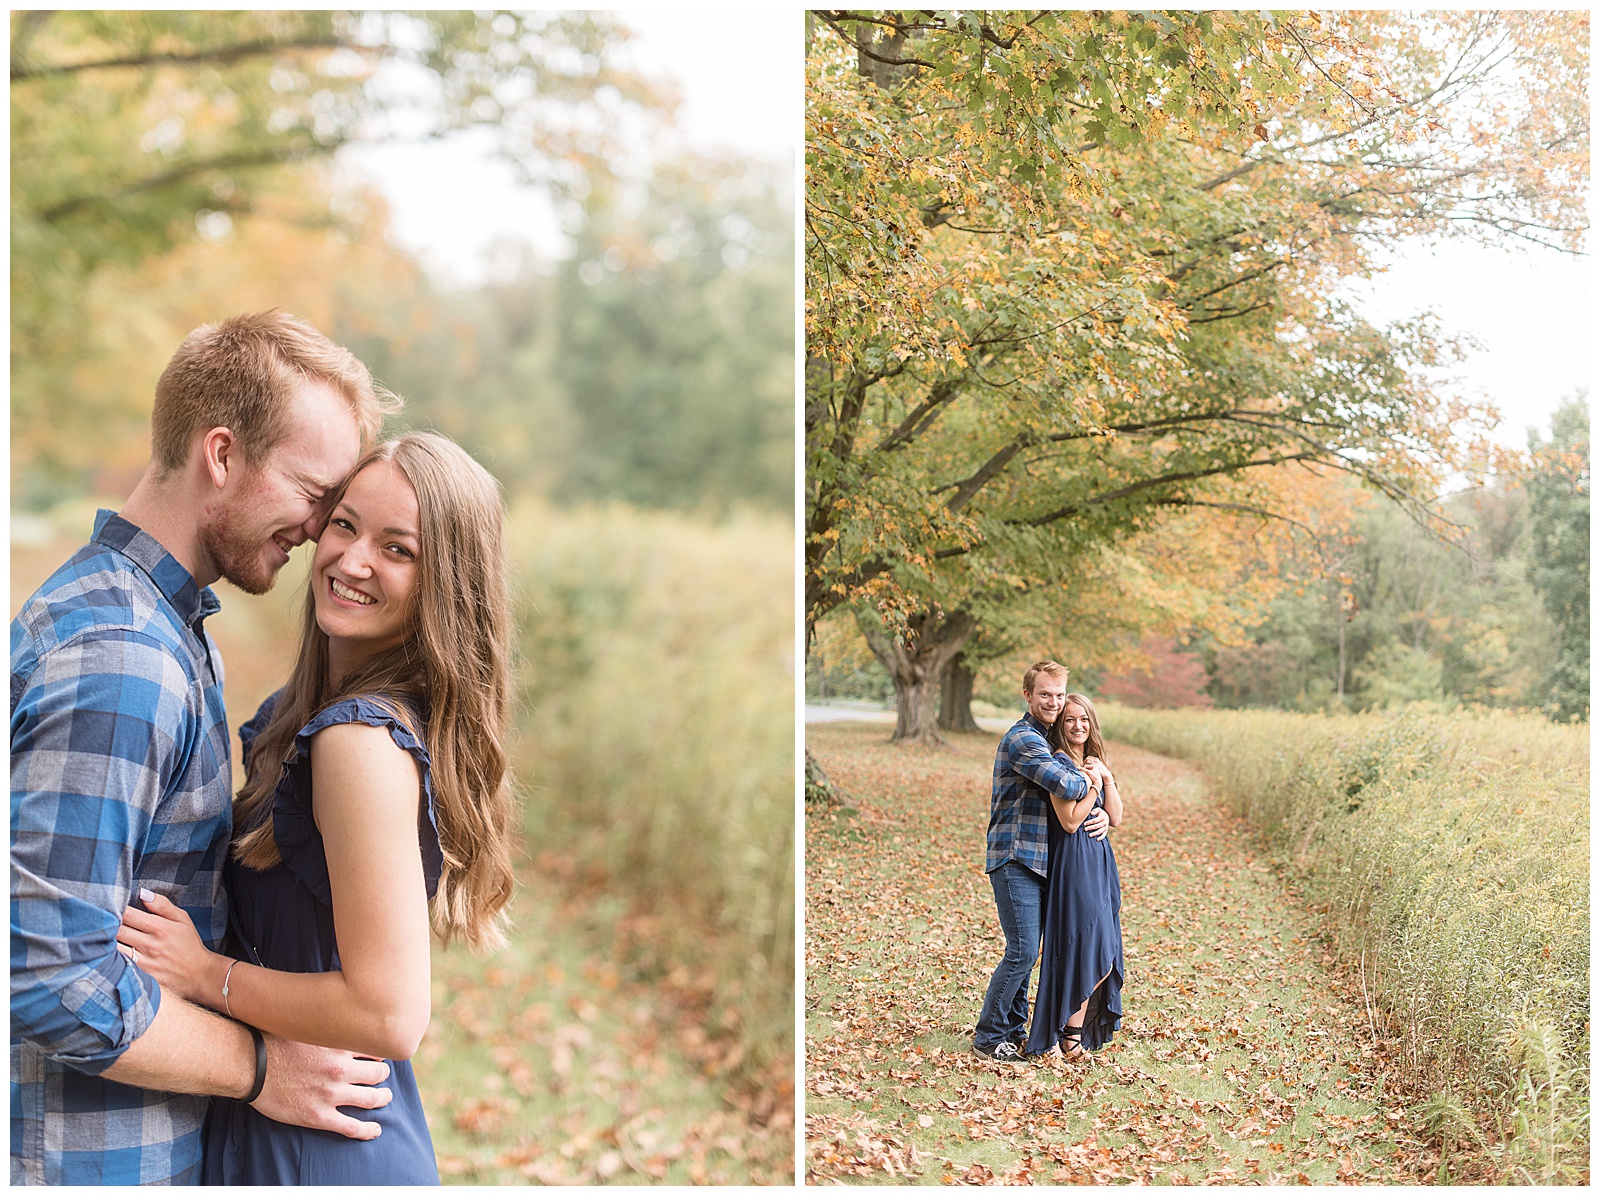 engaged couple hugging as girl smiles and looks at camera by tall wild grasses along pathway covered in fallen leaves